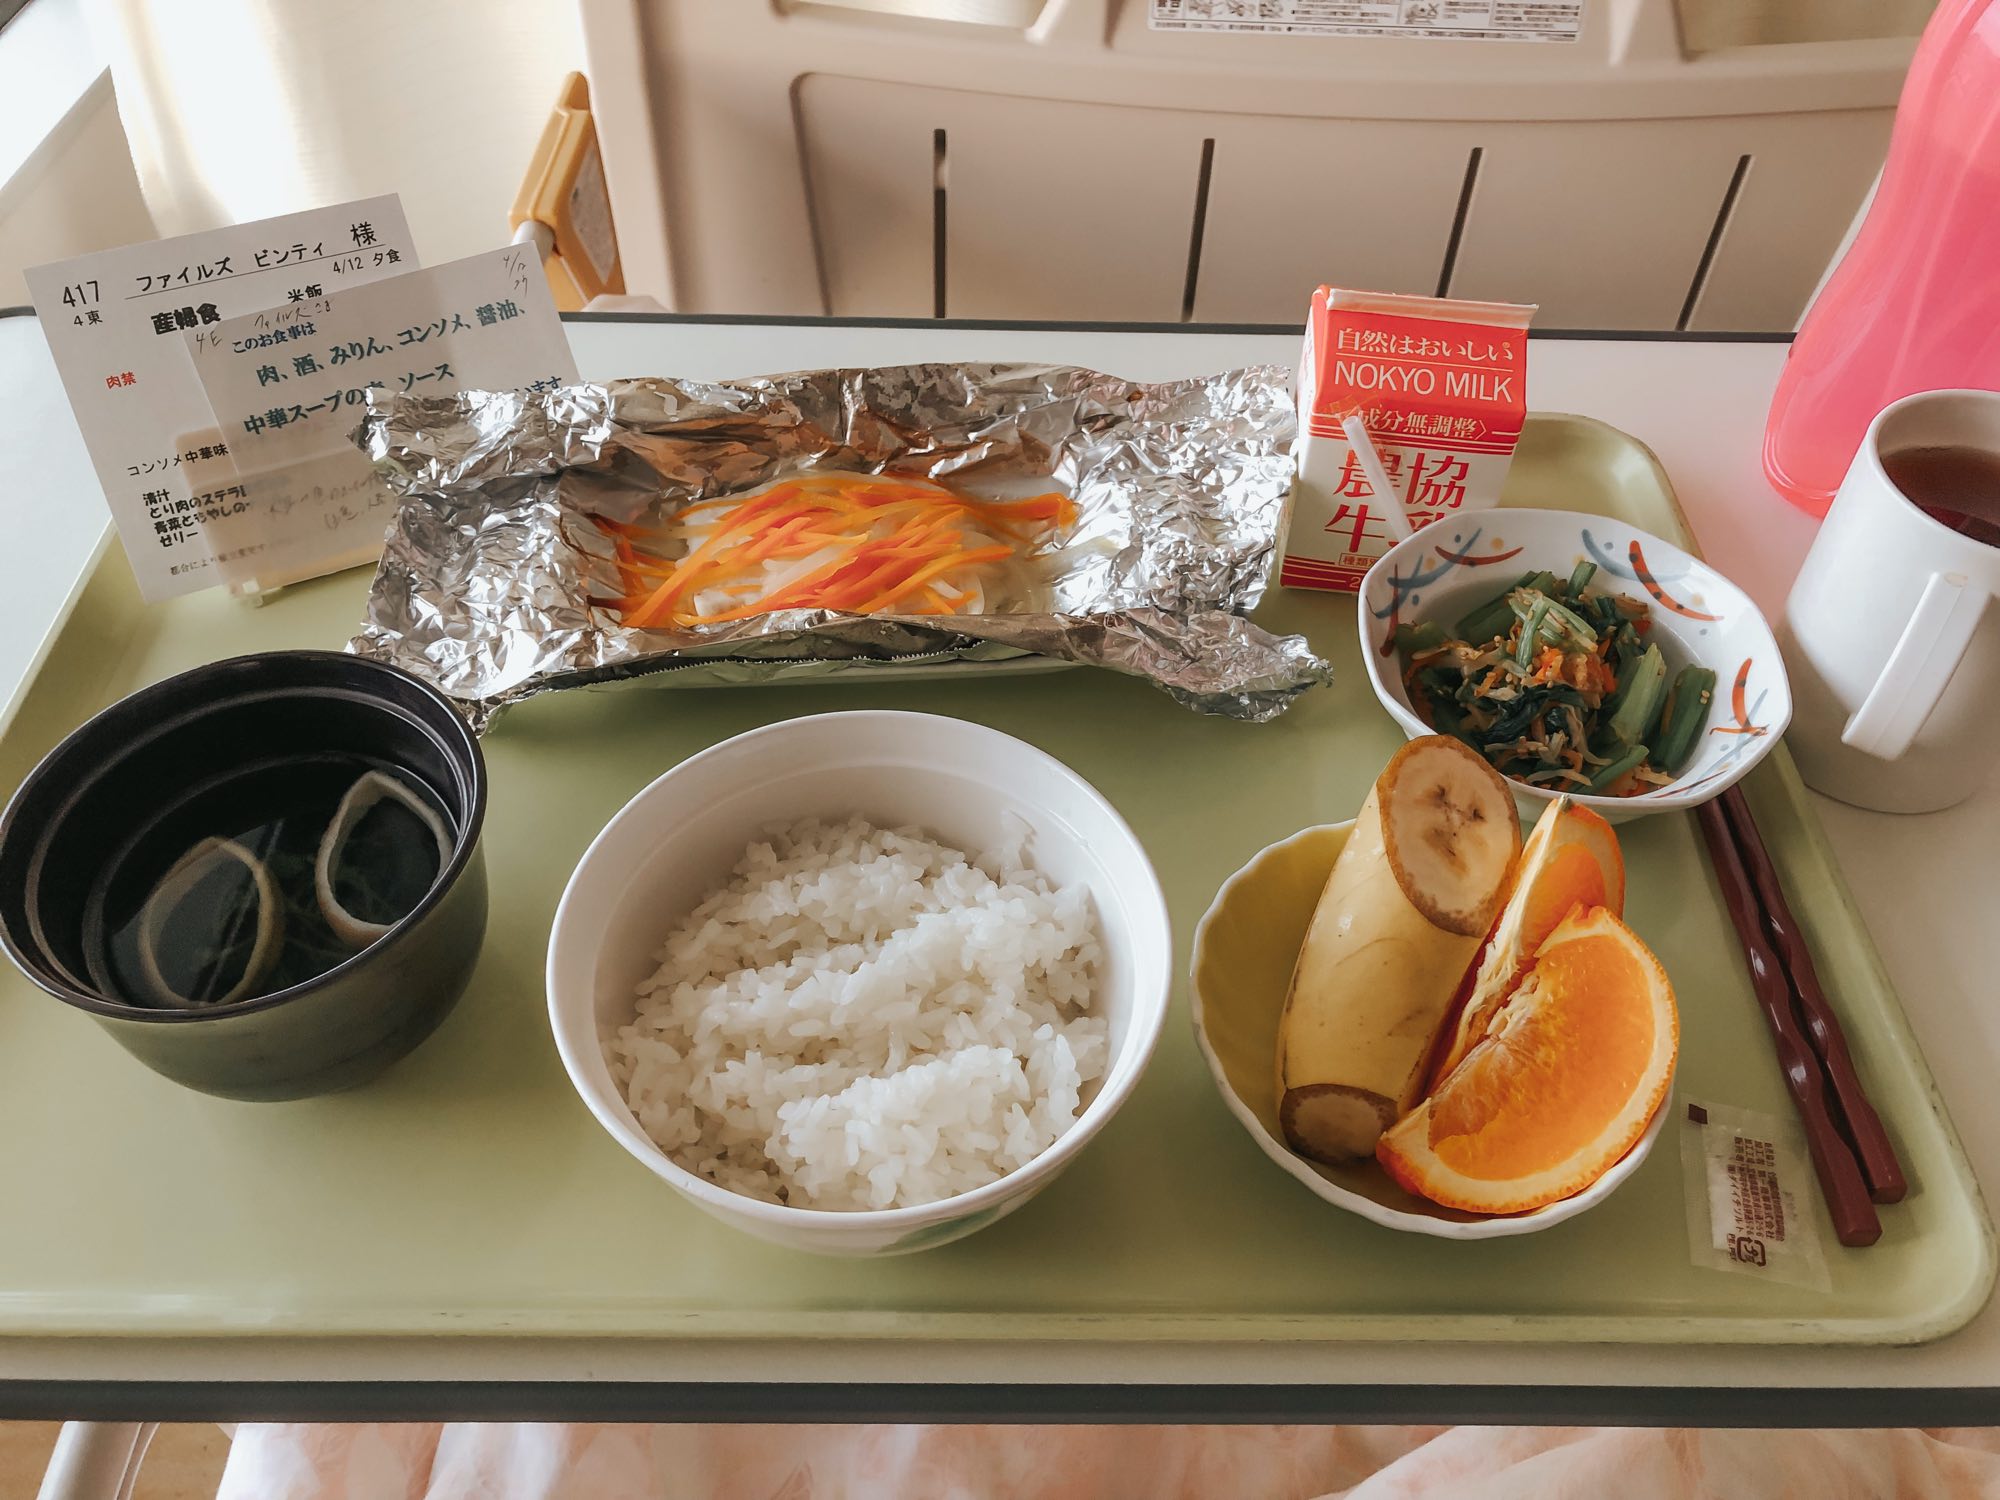 Full meal on a plate provided to mothers giving birth in Japan hospitals